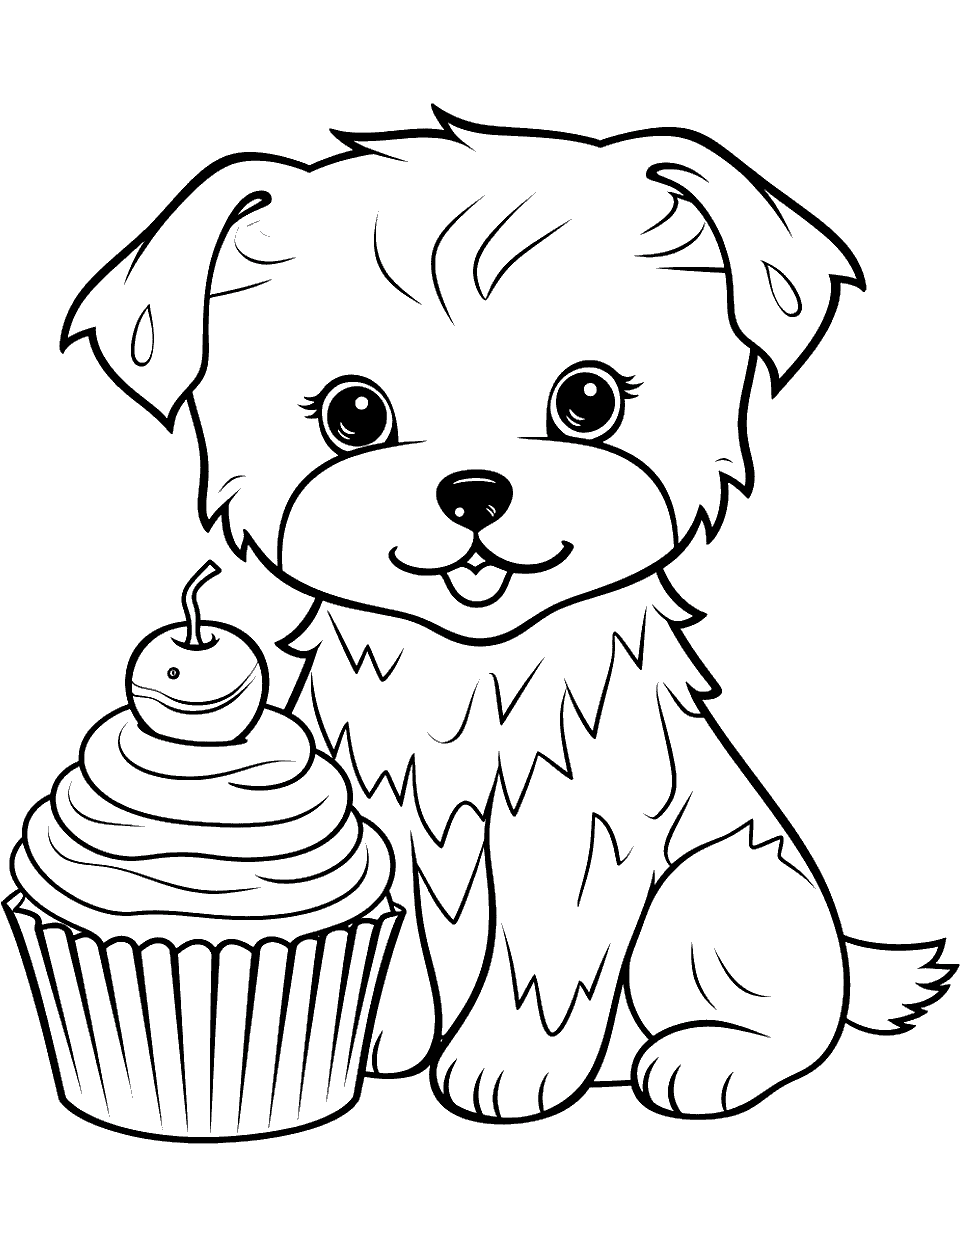 Puppy and Cupcake Coloring Page - A cute puppy sitting next to a large cupcake.